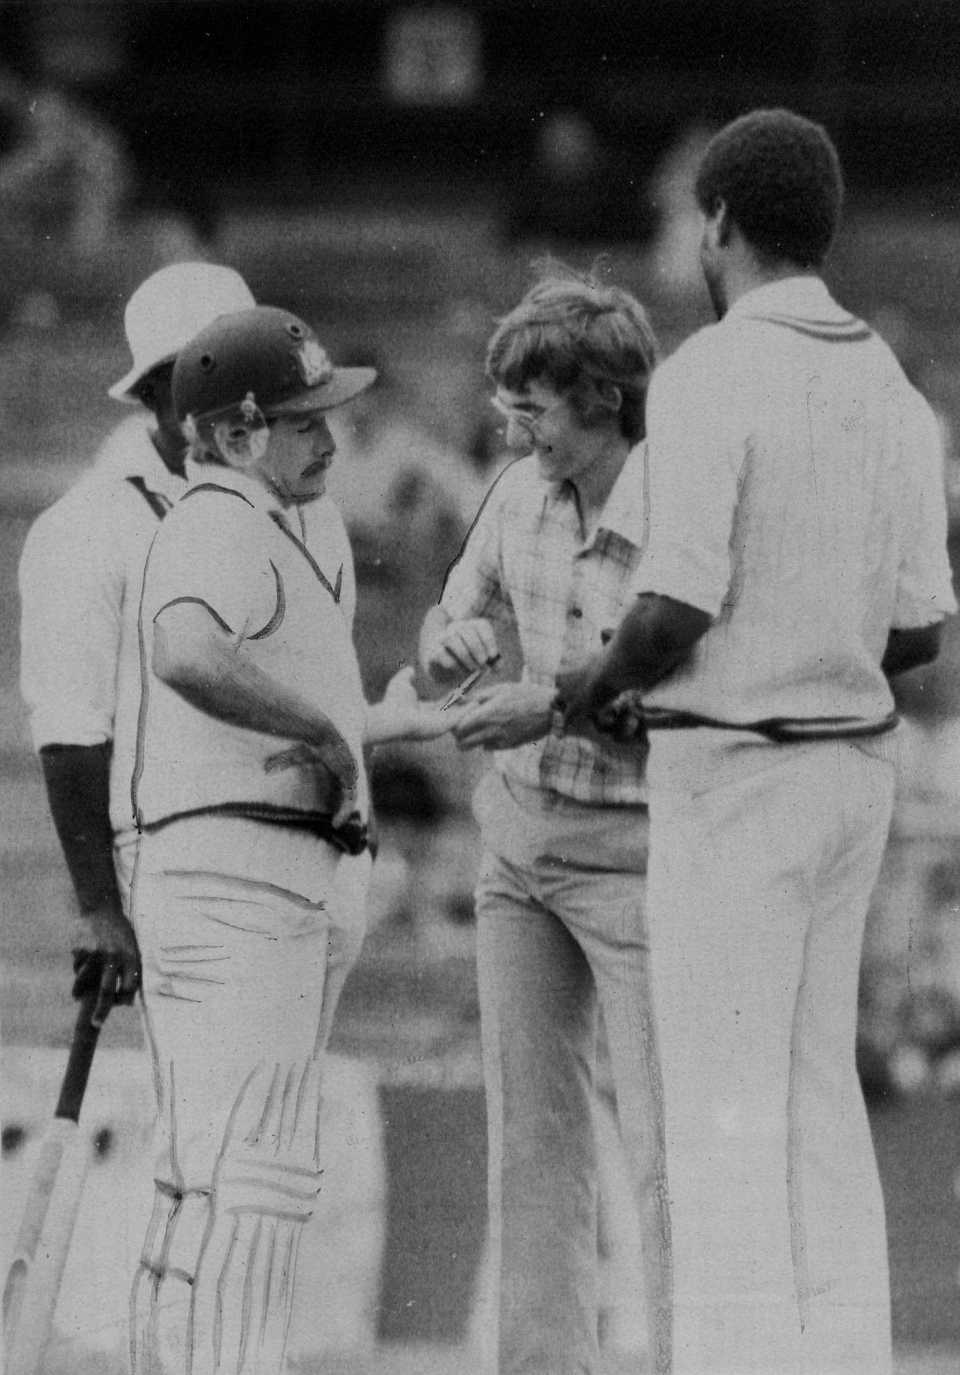 Bruce Laird grimaces while receiving a painkilling injection after being hit on the hand by Michael Holding, Australia v West Indies, 2nd Test, Melbourne, 3rd day, December 31, 1979